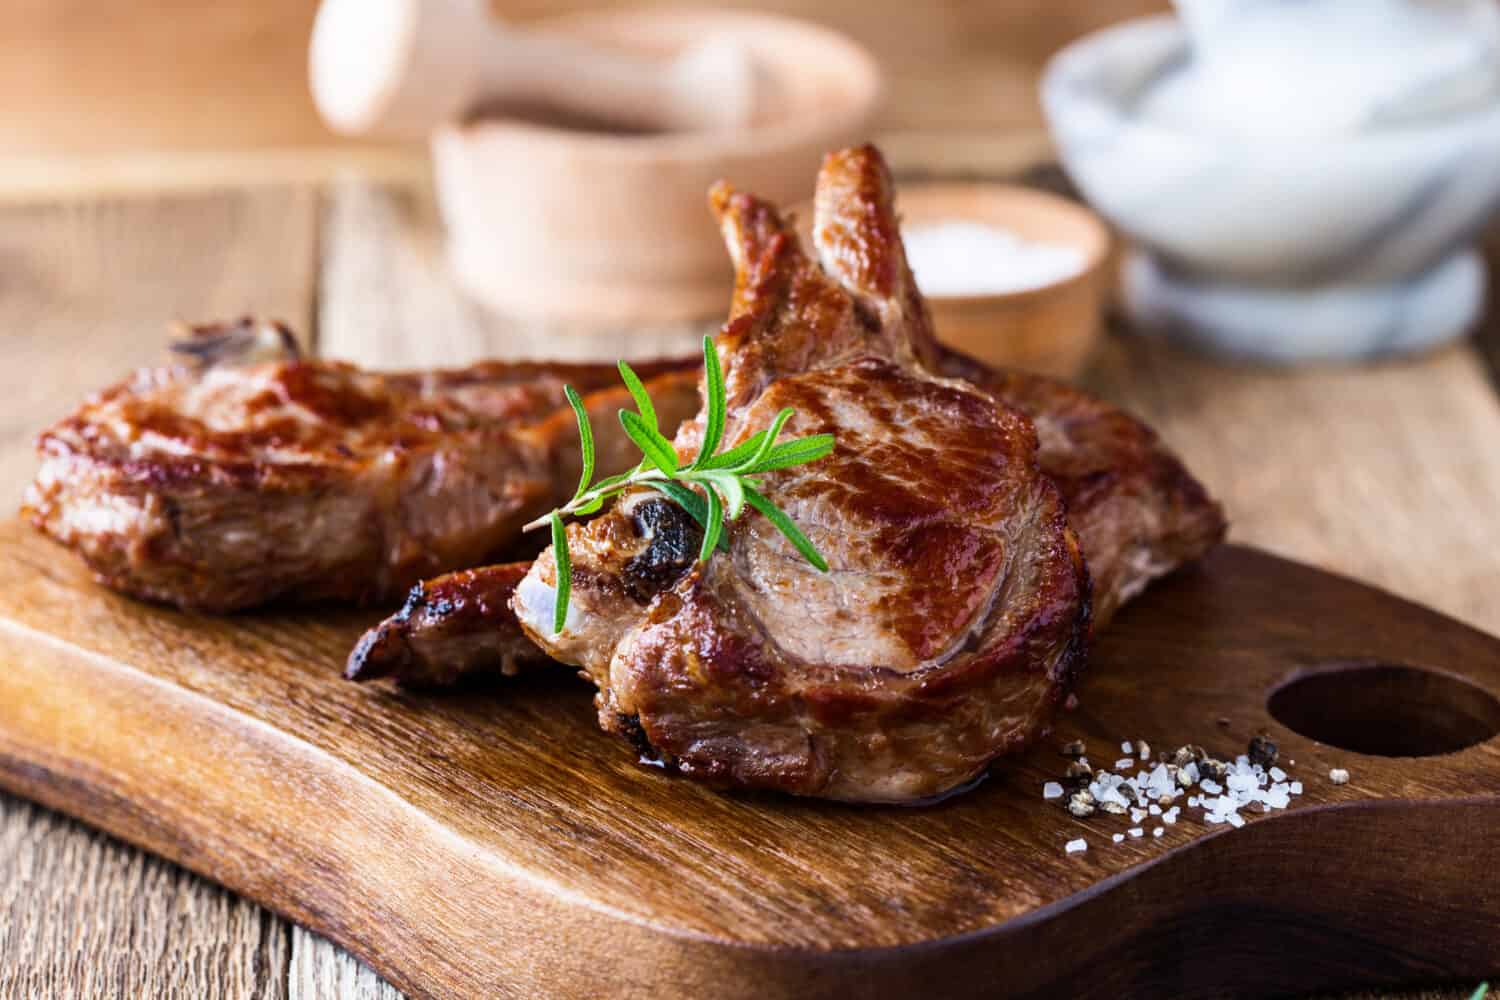 Roasted veal chops with fresh herbs on rustic wooden cutting board, pan seared steak dinner